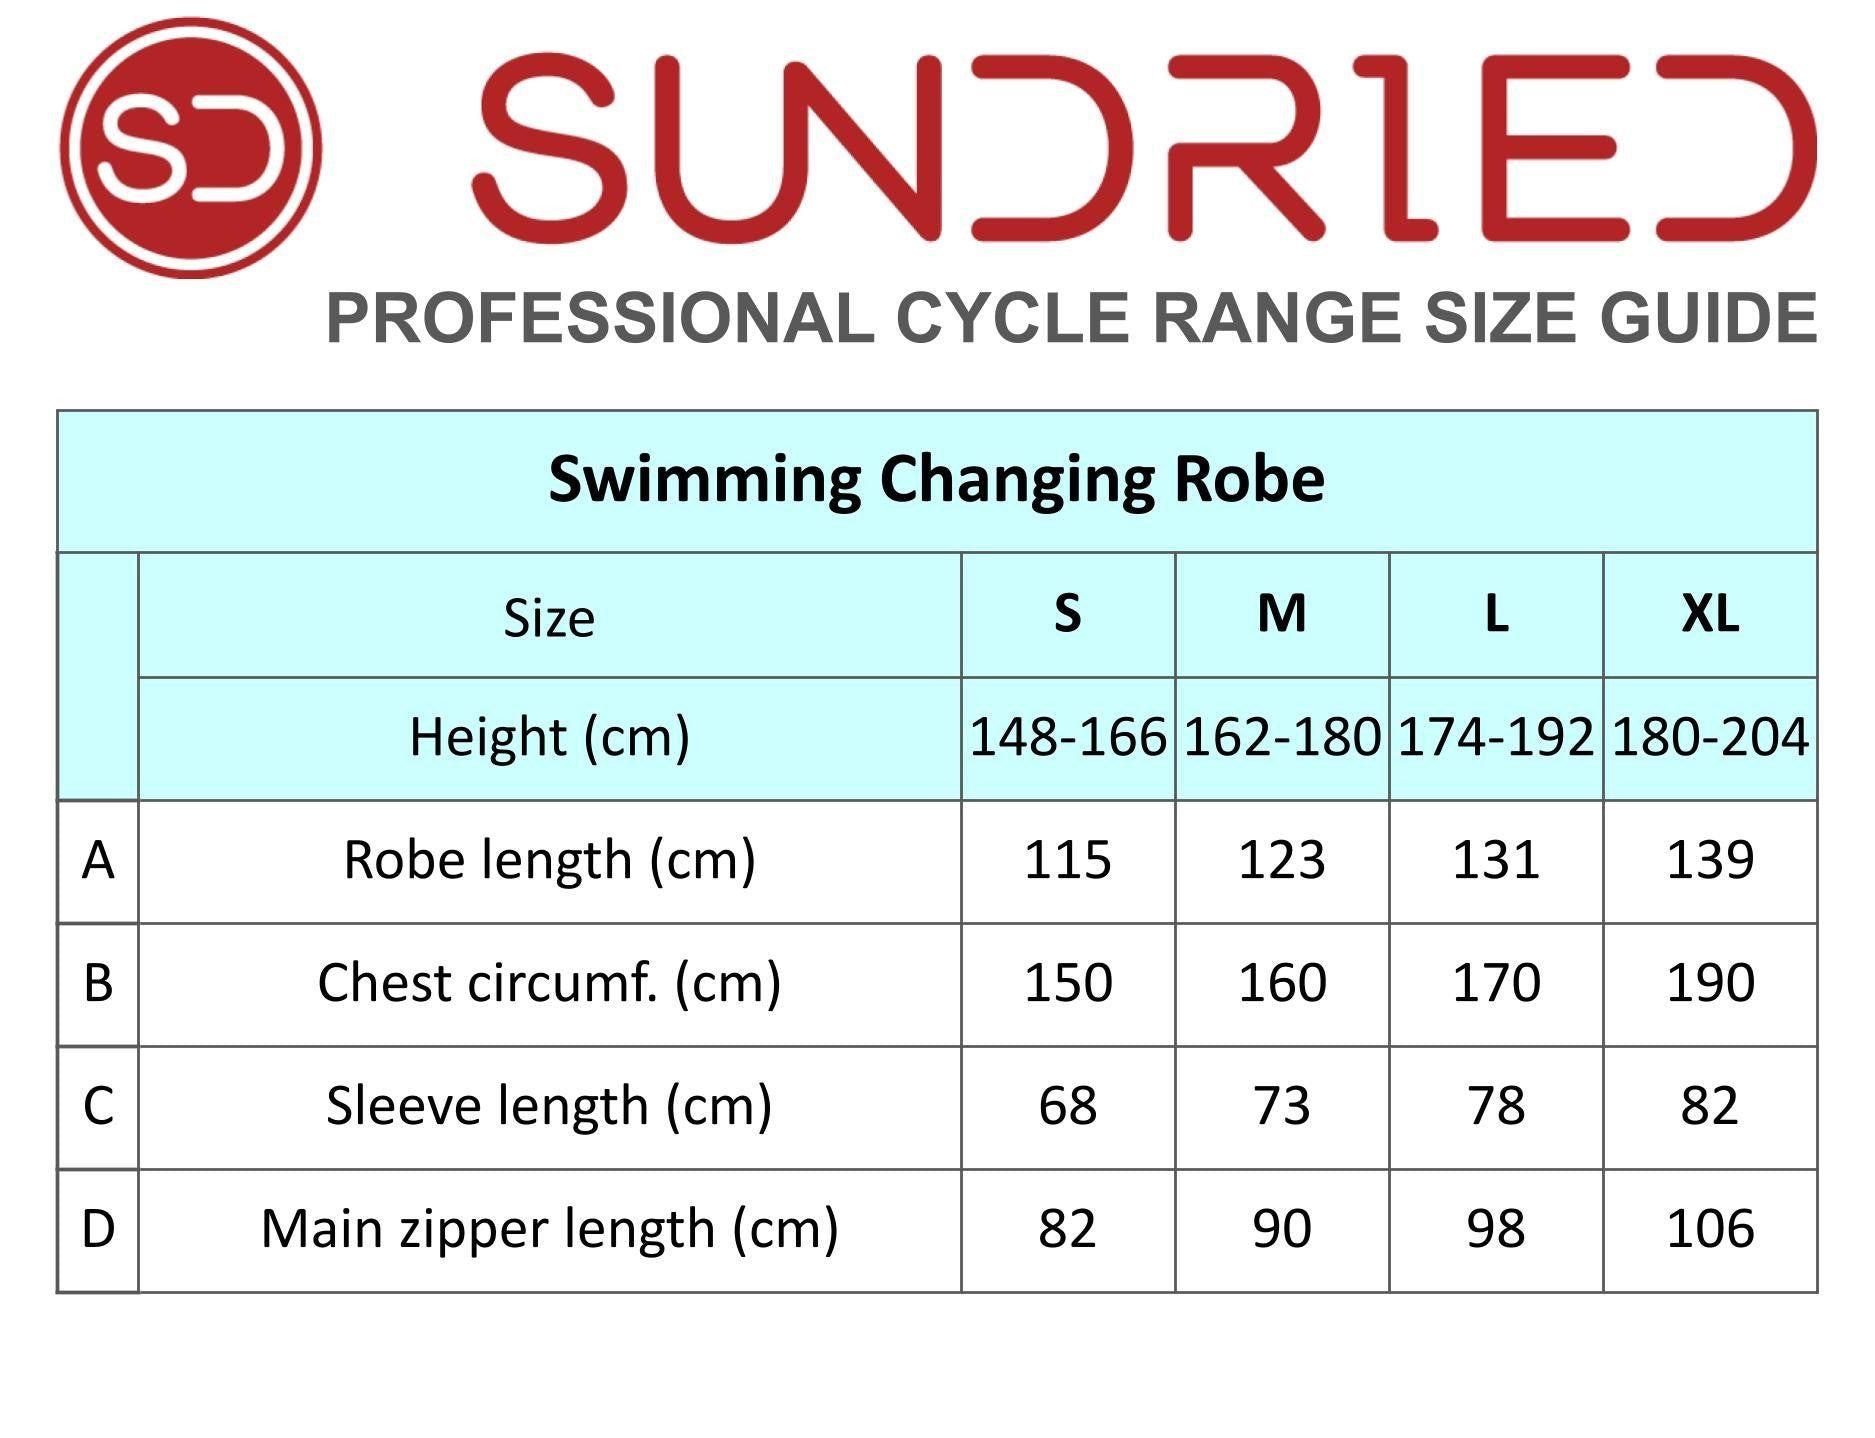 SD0417 Swimming Changing Robe Size Guide